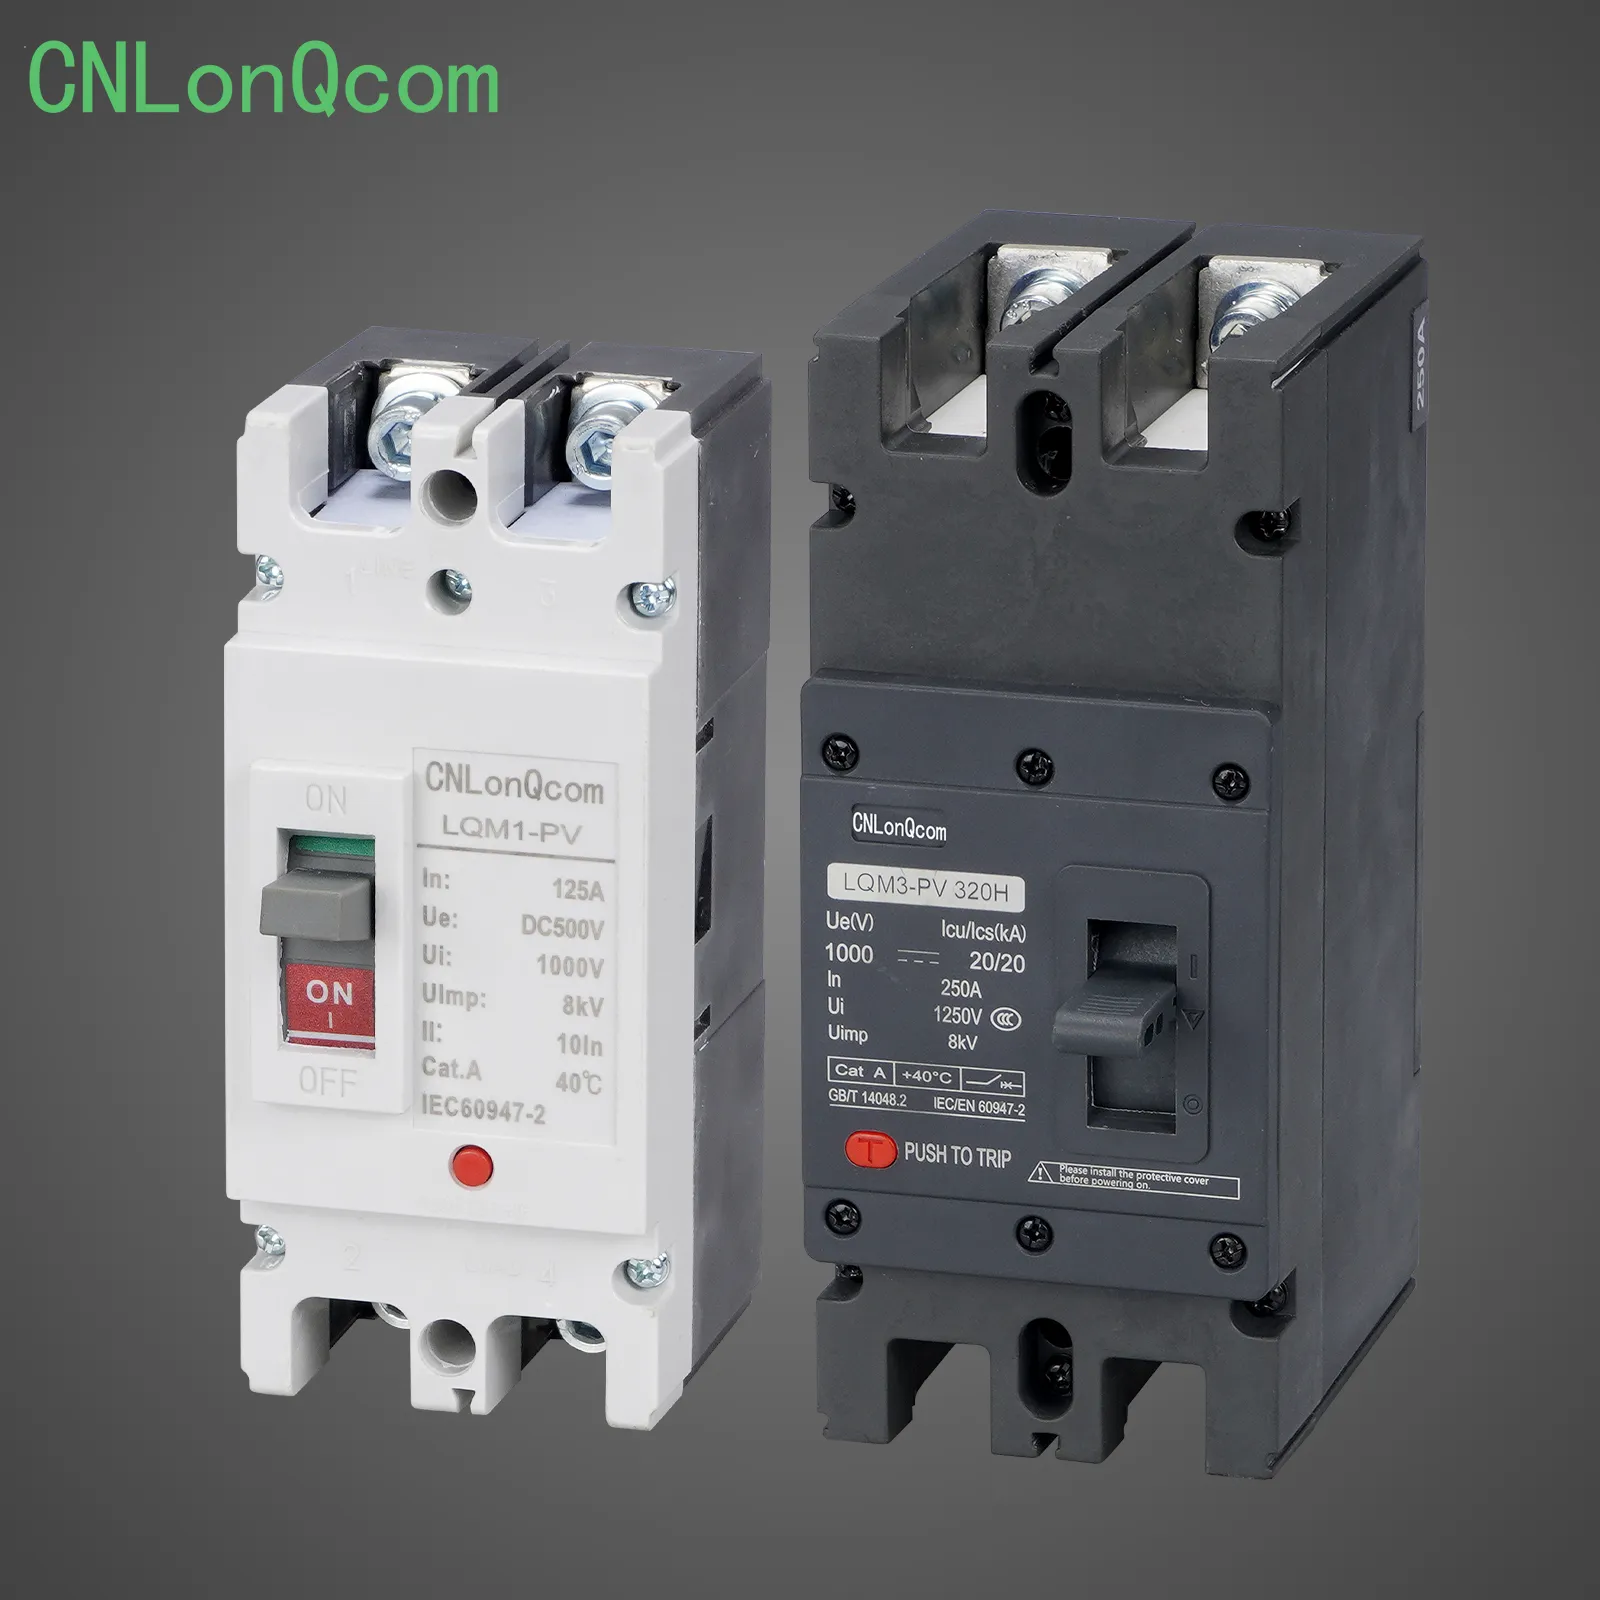 What is a Molded Case Circuit Breaker (MCCB)?